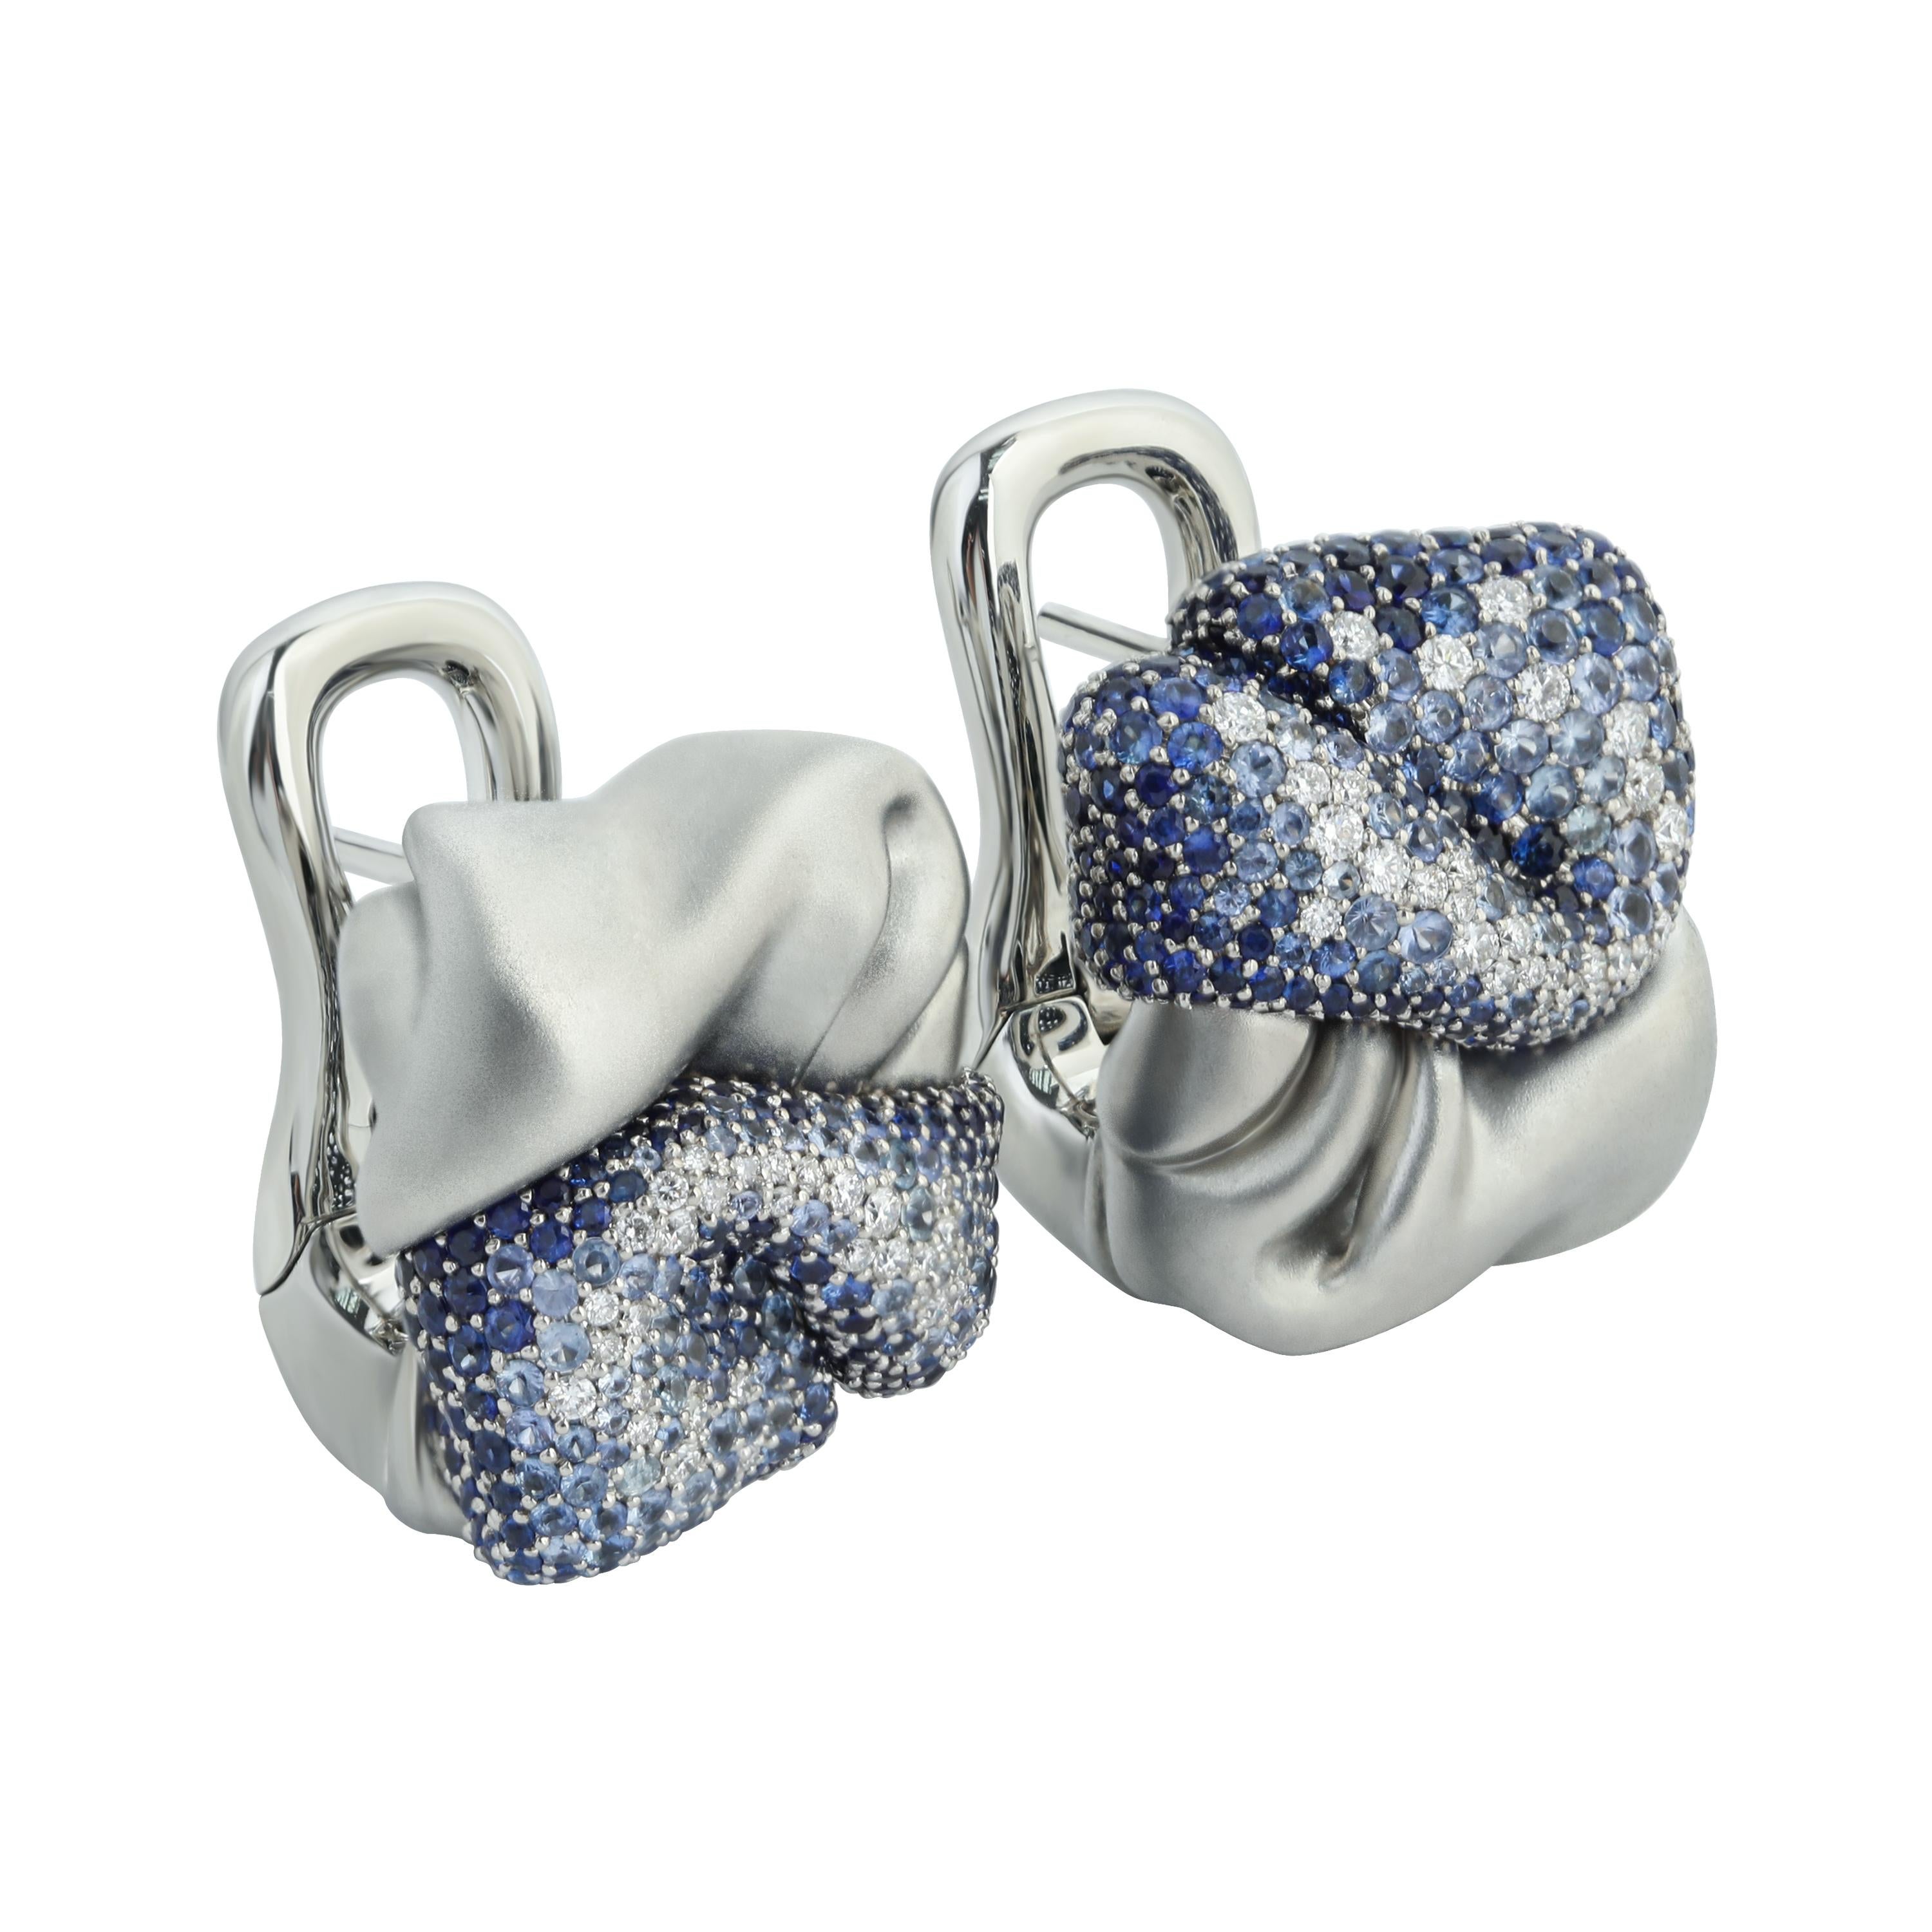 Diamonds Sapphires 18 Karat White Gold Earrings
Our Pre-a-Porter collection is full of different textures and patterns. This time we decided to depict just a piece of crumpled fabric in the Earrings. One part of the Earring is made of 18 Karat Matte